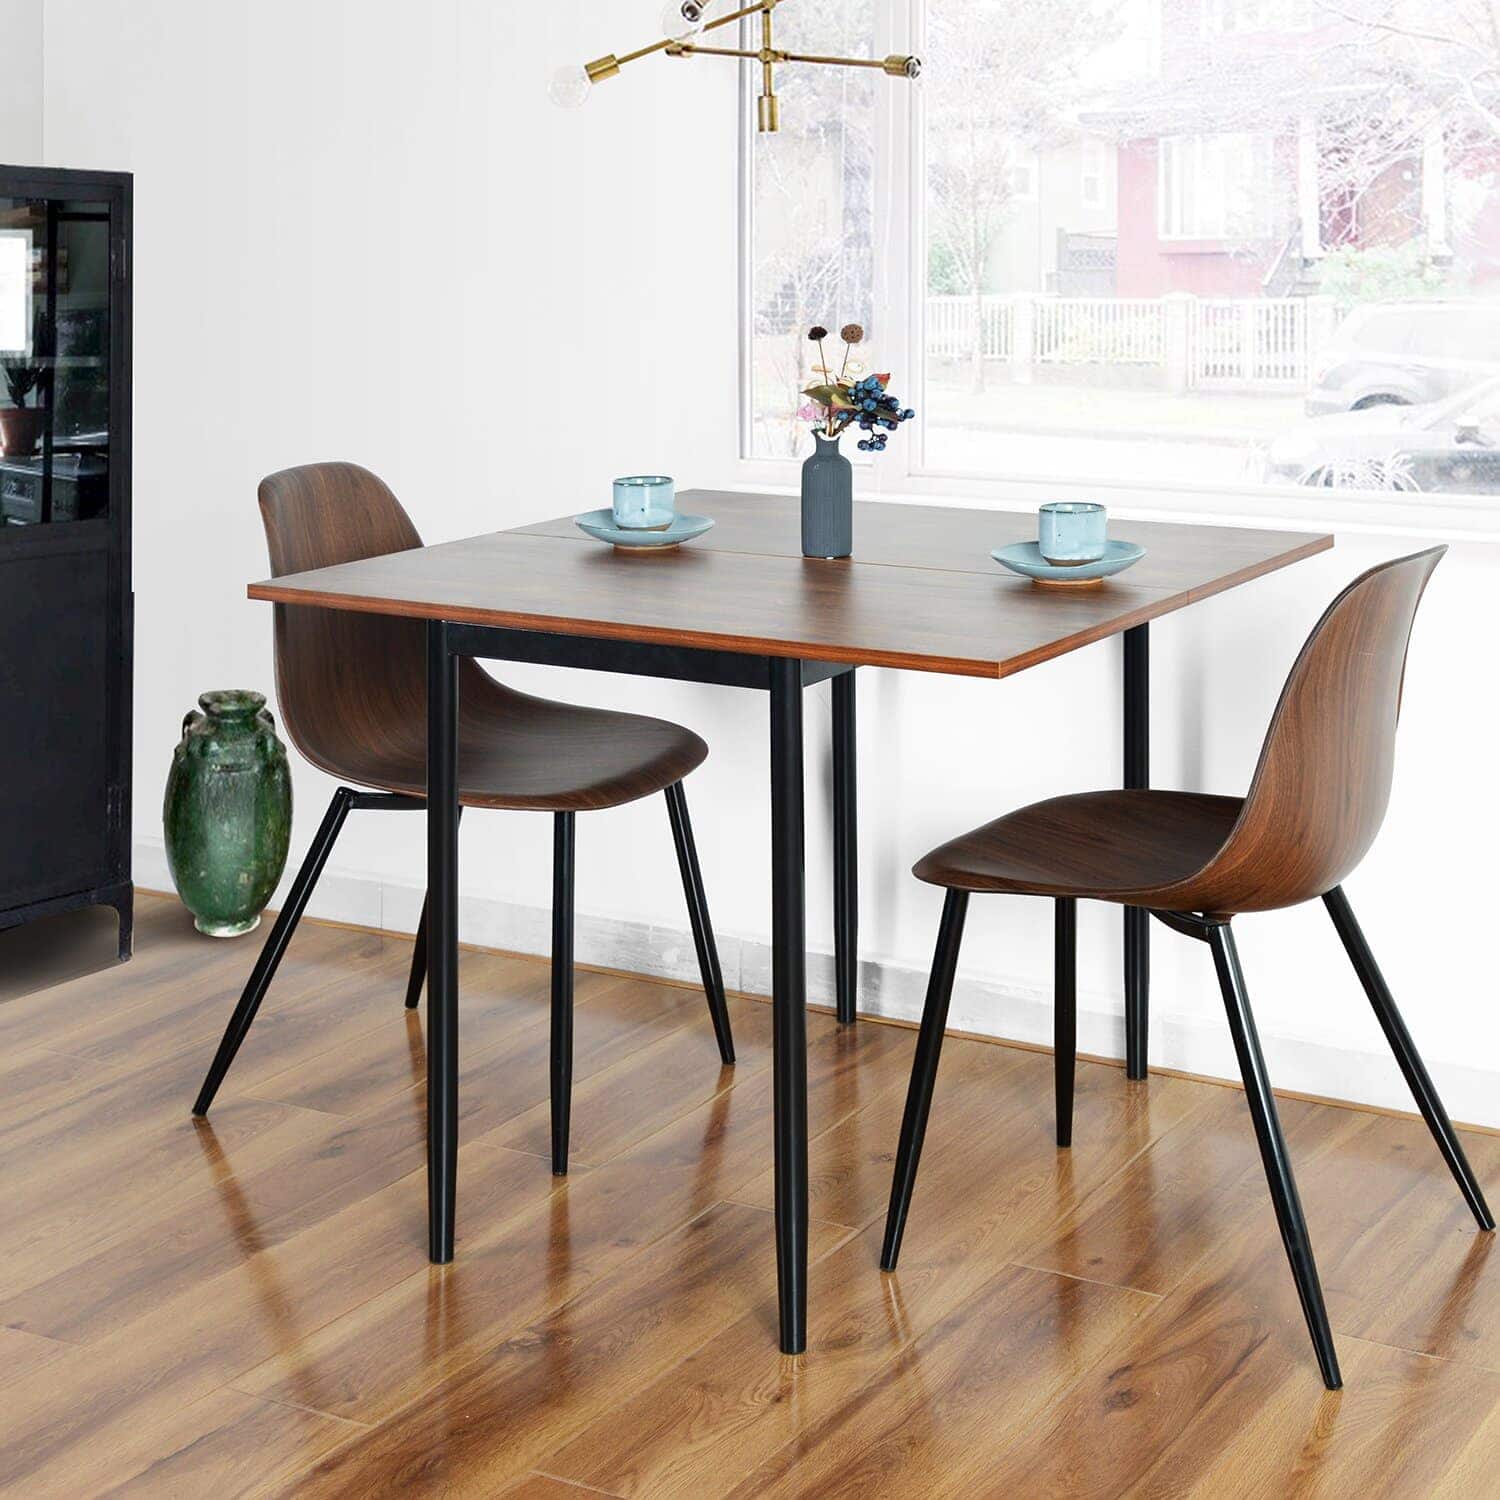 20 Dining Tables Ideas For Small Spaces, Small Dining Room Table